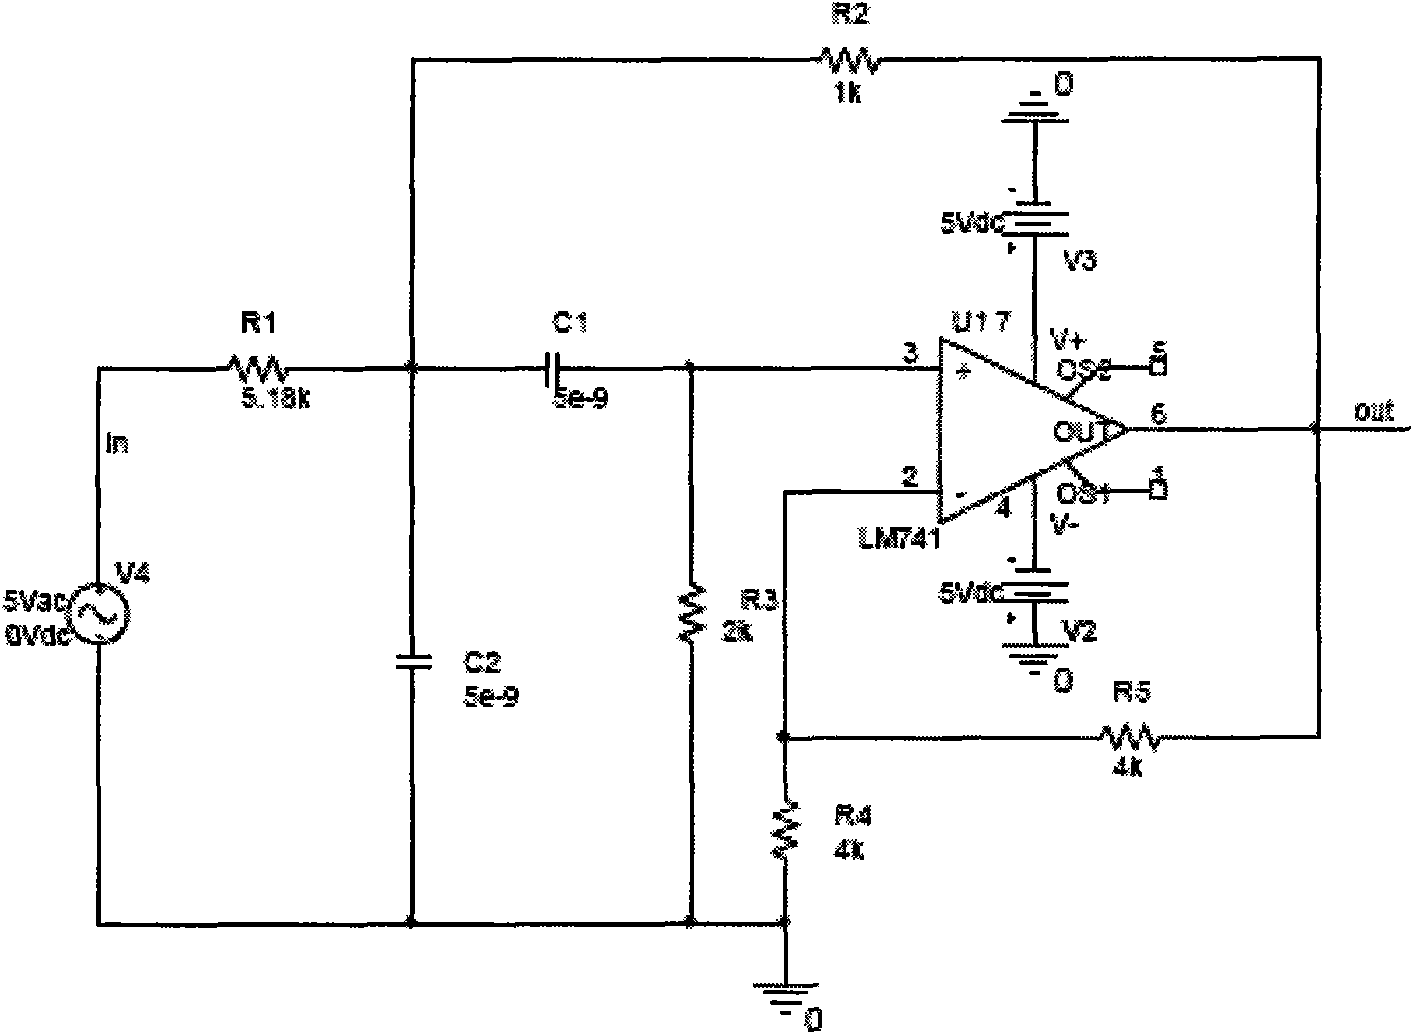 Method for realizing analogue circuit fault diagnosis based on standard deviation and skewness by neural network